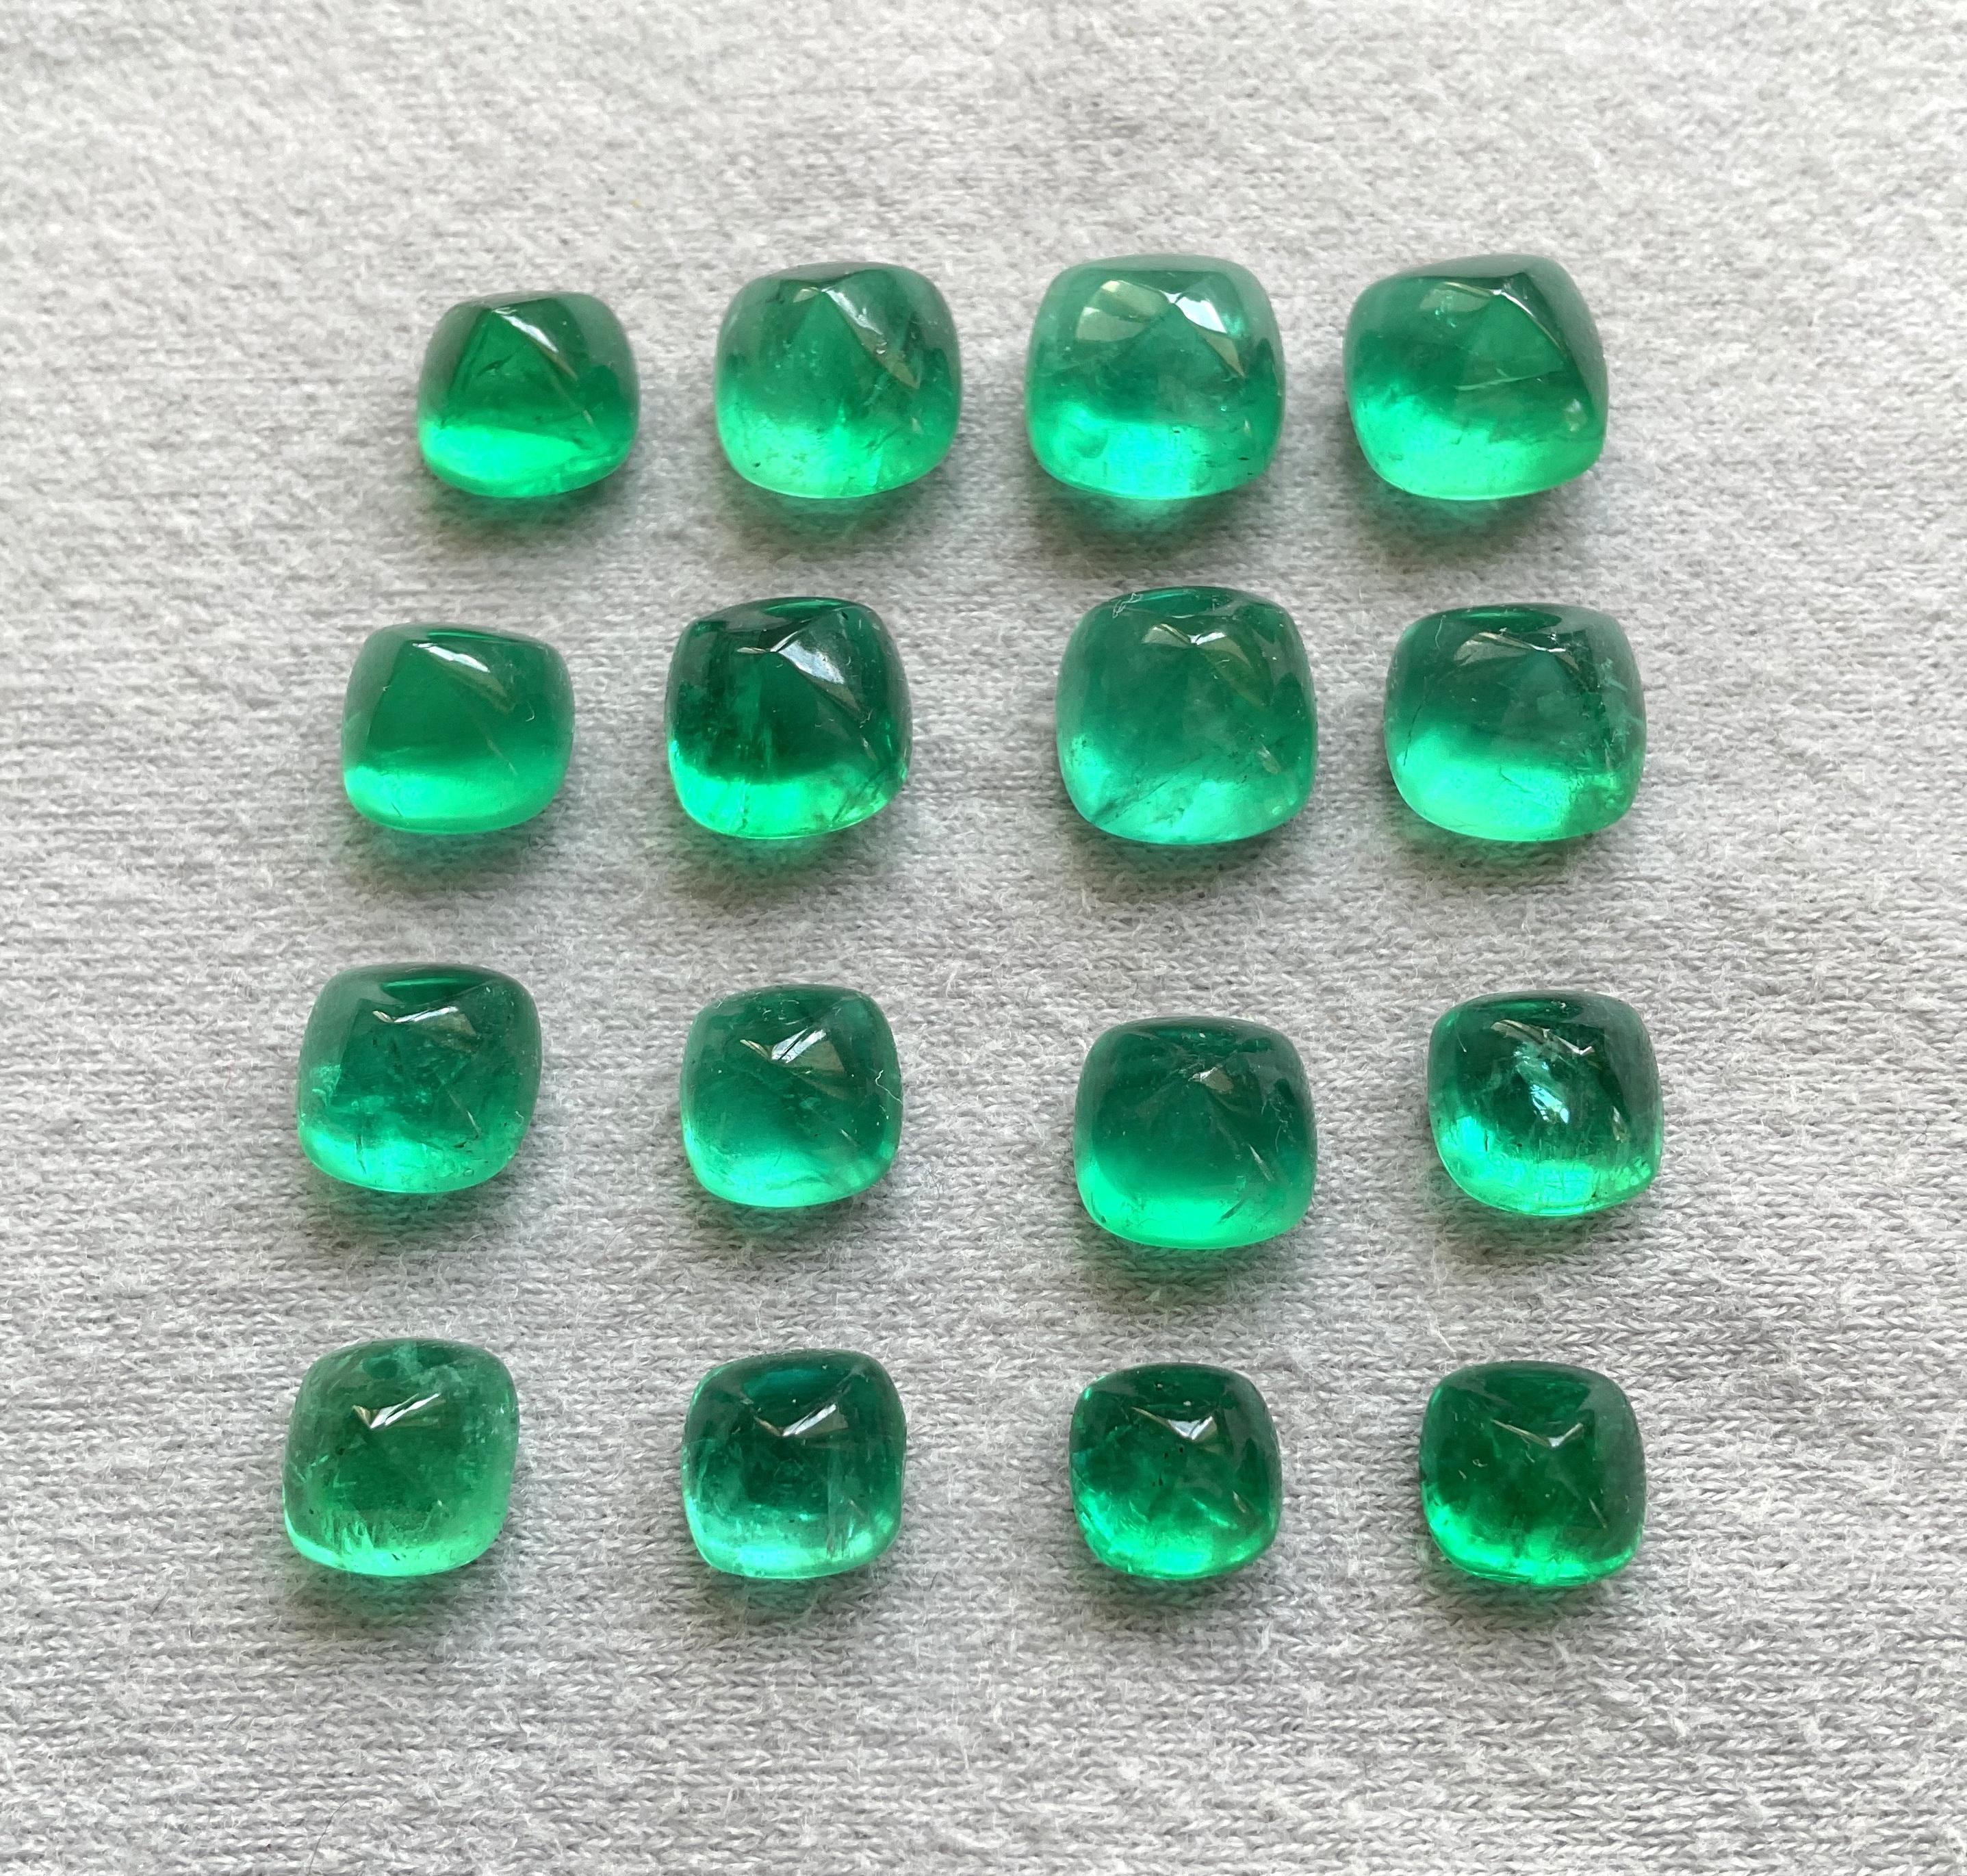 59.30 Carats Zambian Emerald Sugarloaf Cabochon Lot Top Quality Natural Gemstone For Sale 1